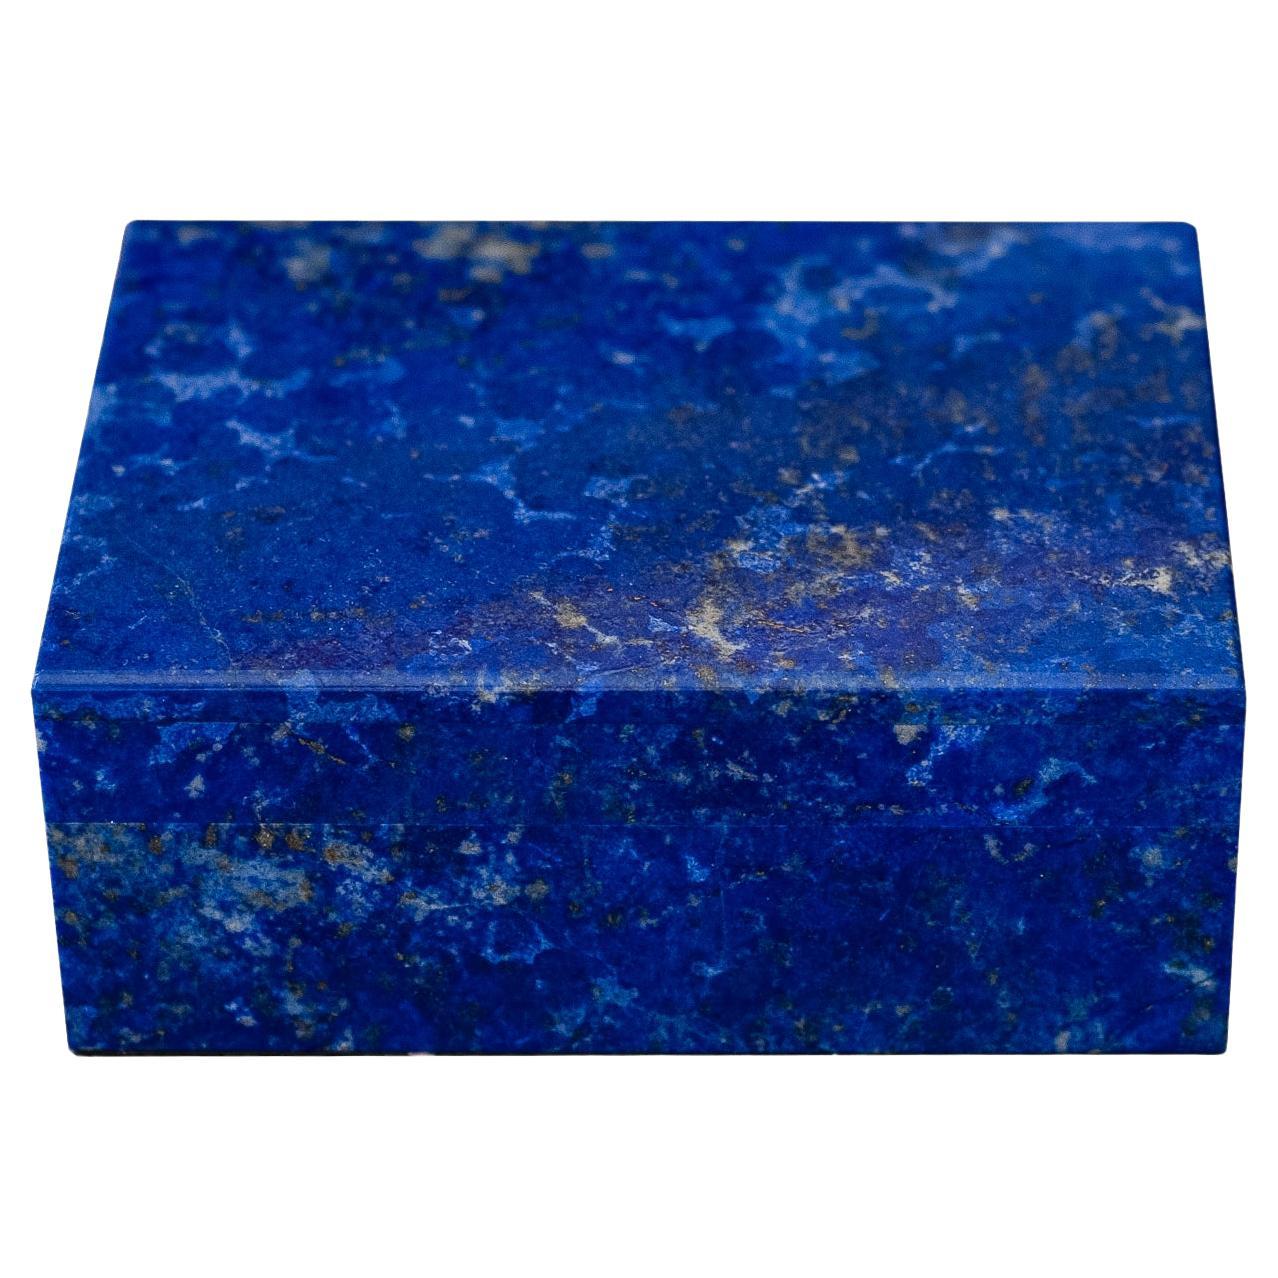 Contemporary Blue Lapis Lazuli Box with Hinged Lid